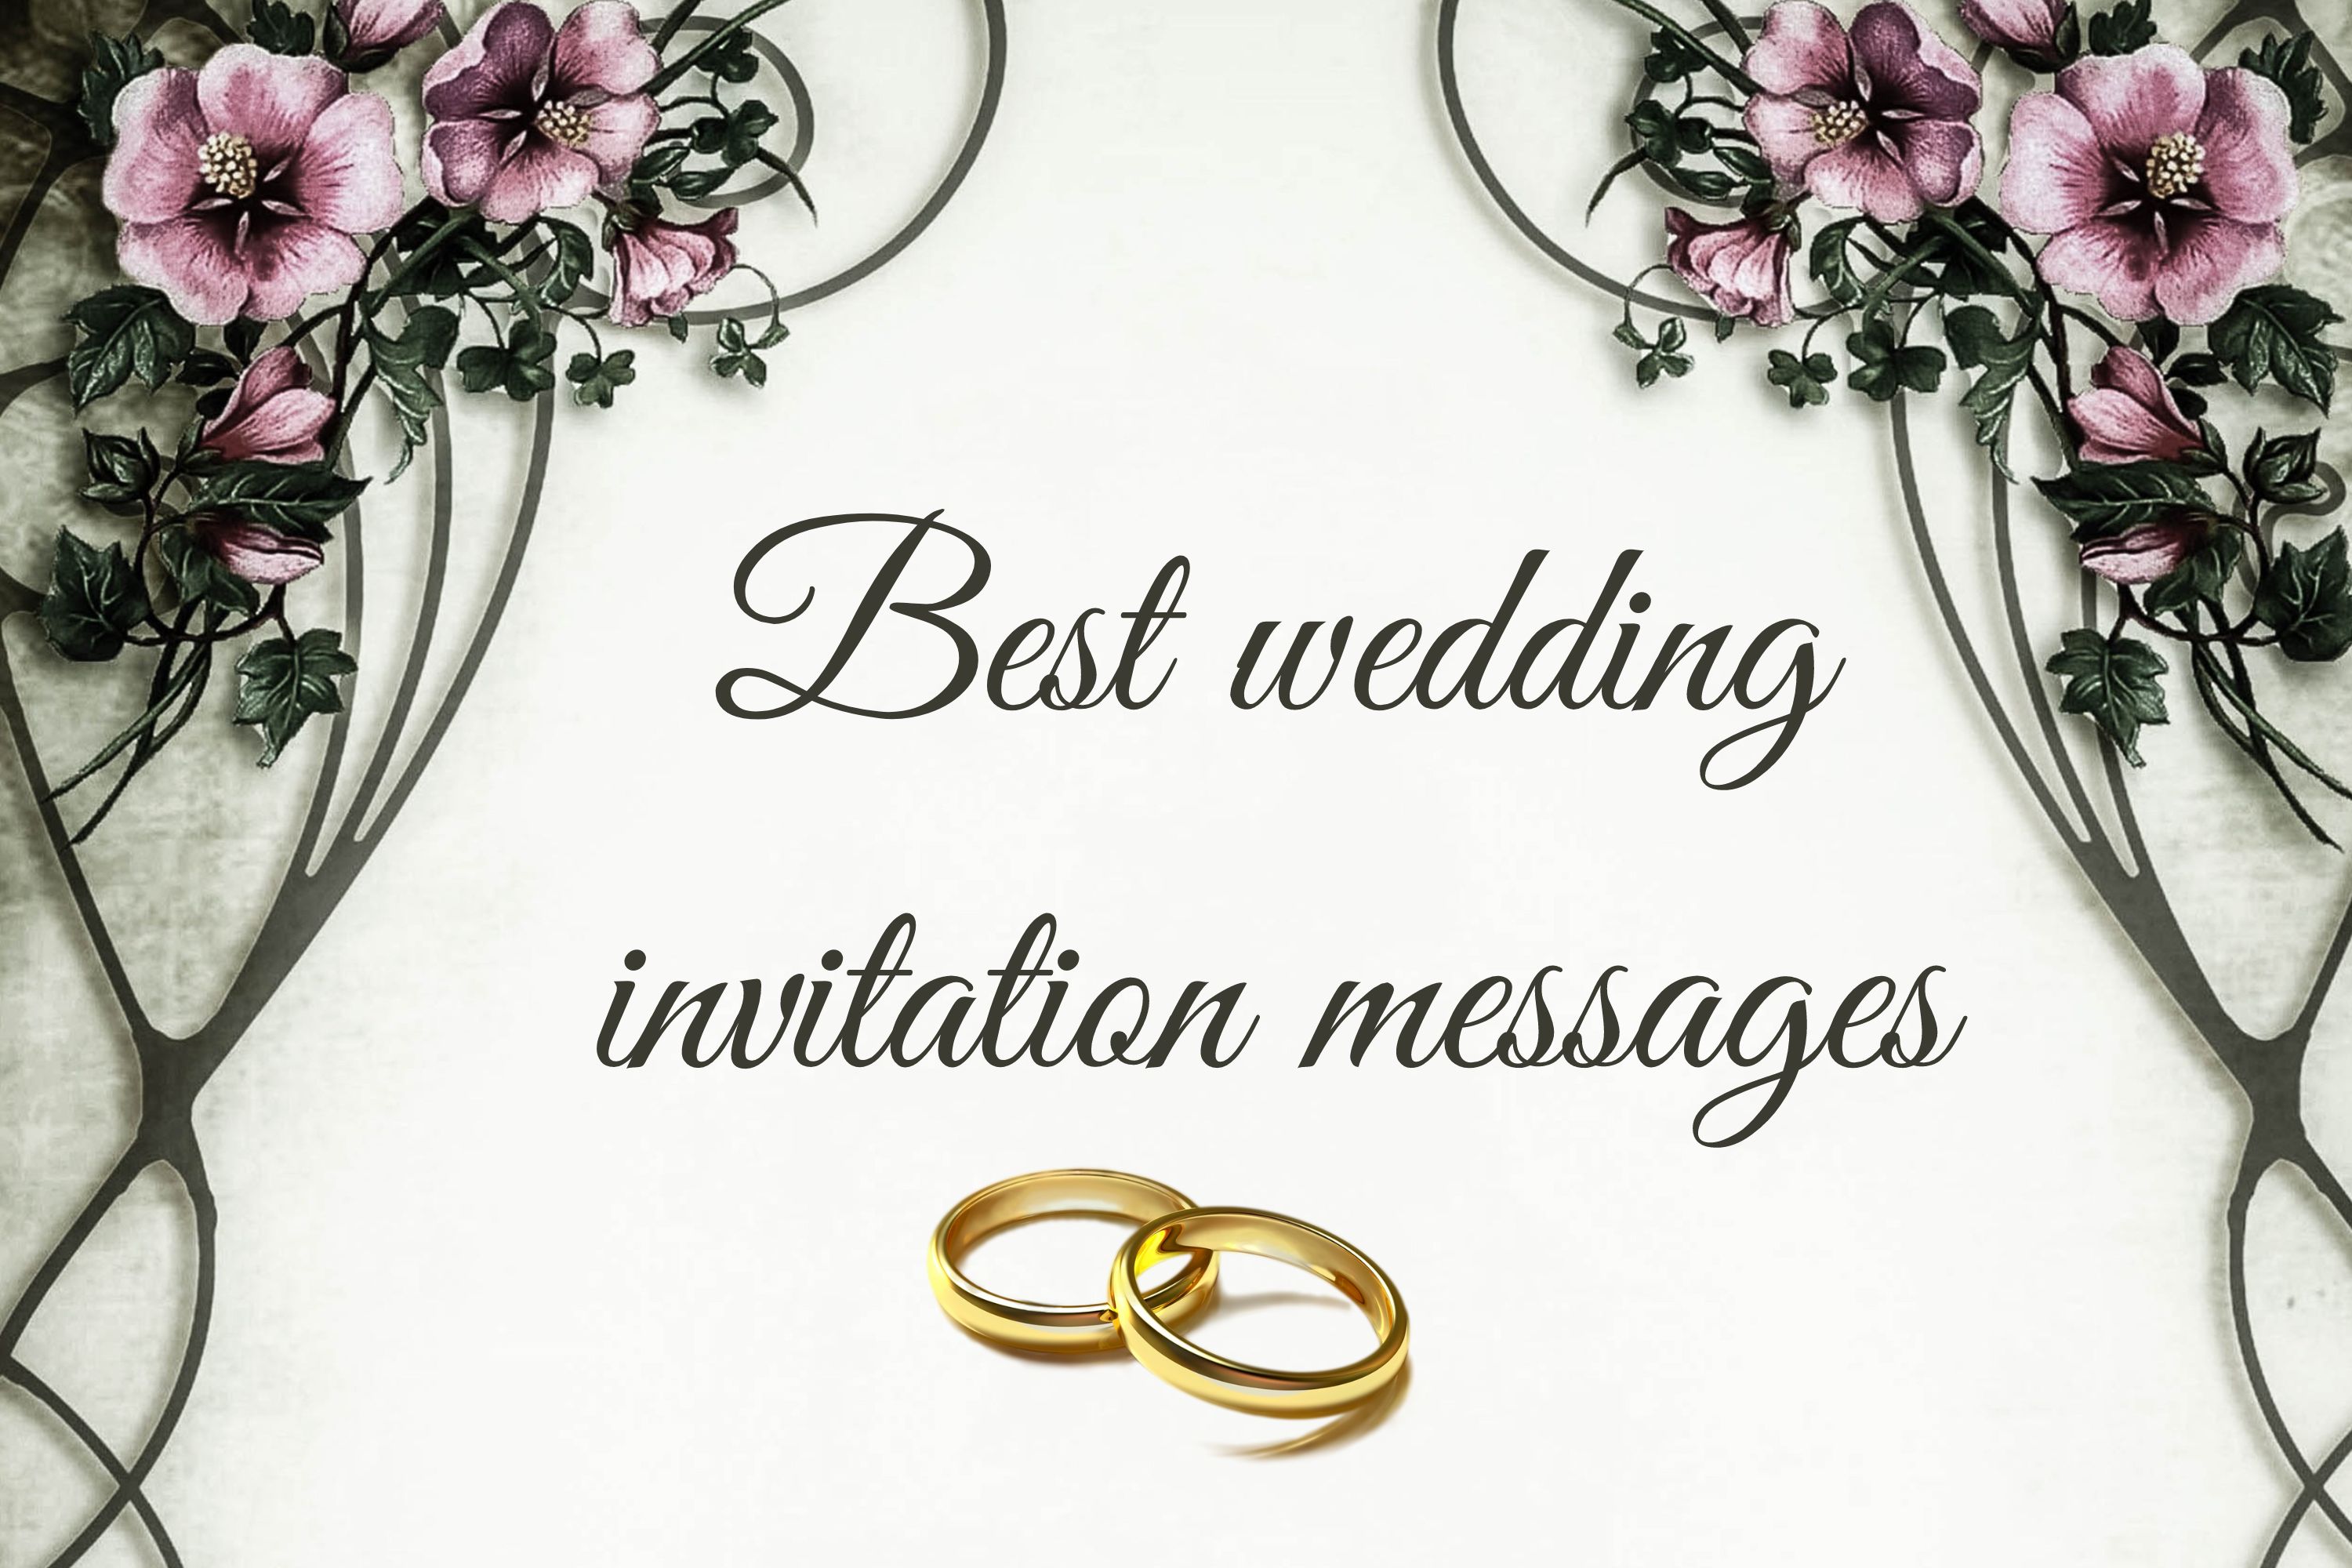 150+ best wedding invitation messages for friends and family